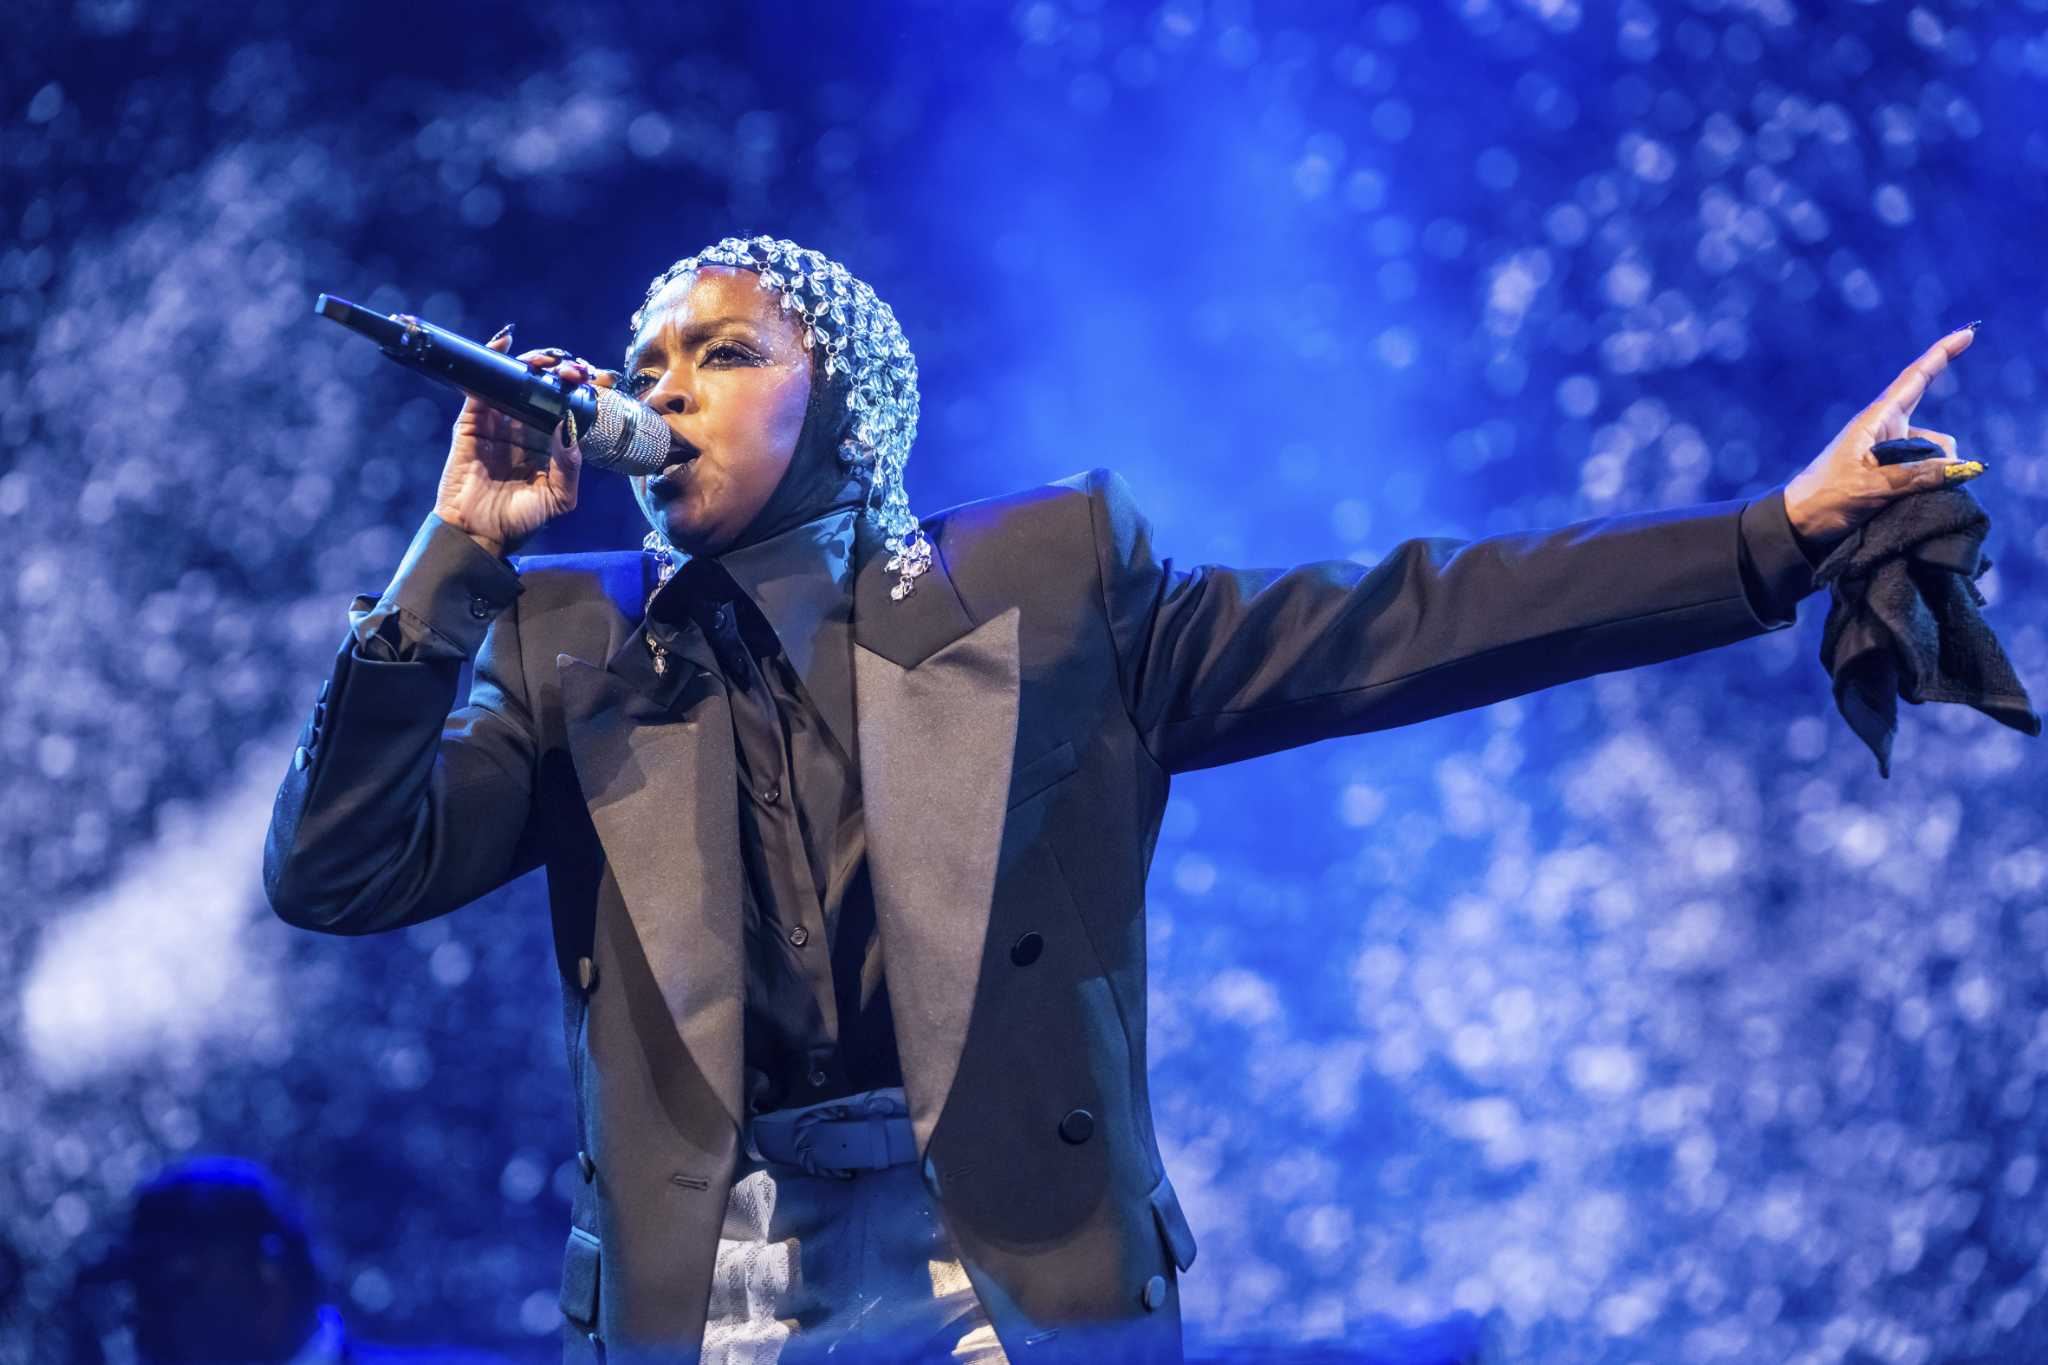 Lauryn Hill's classic 'Miseducation' album tops Apple Music's list of best albums of all time